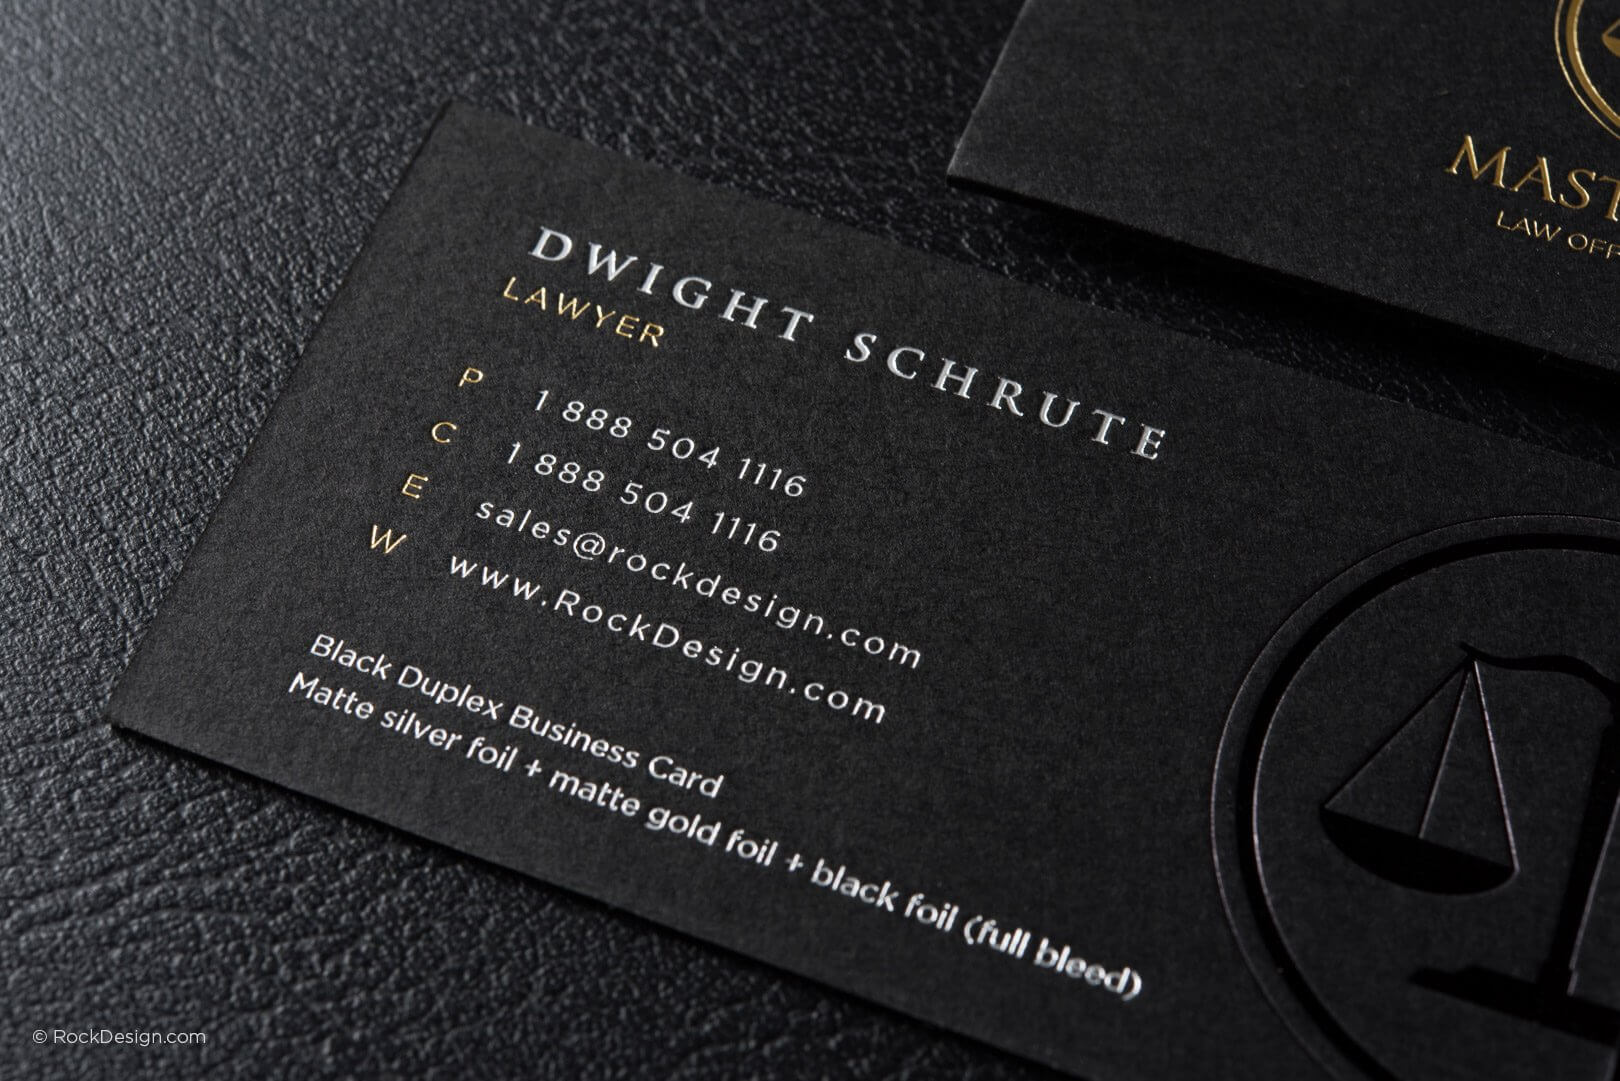 Free Lawyer Business Card Template | Rockdesign Inside Lawyer Business Cards Templates